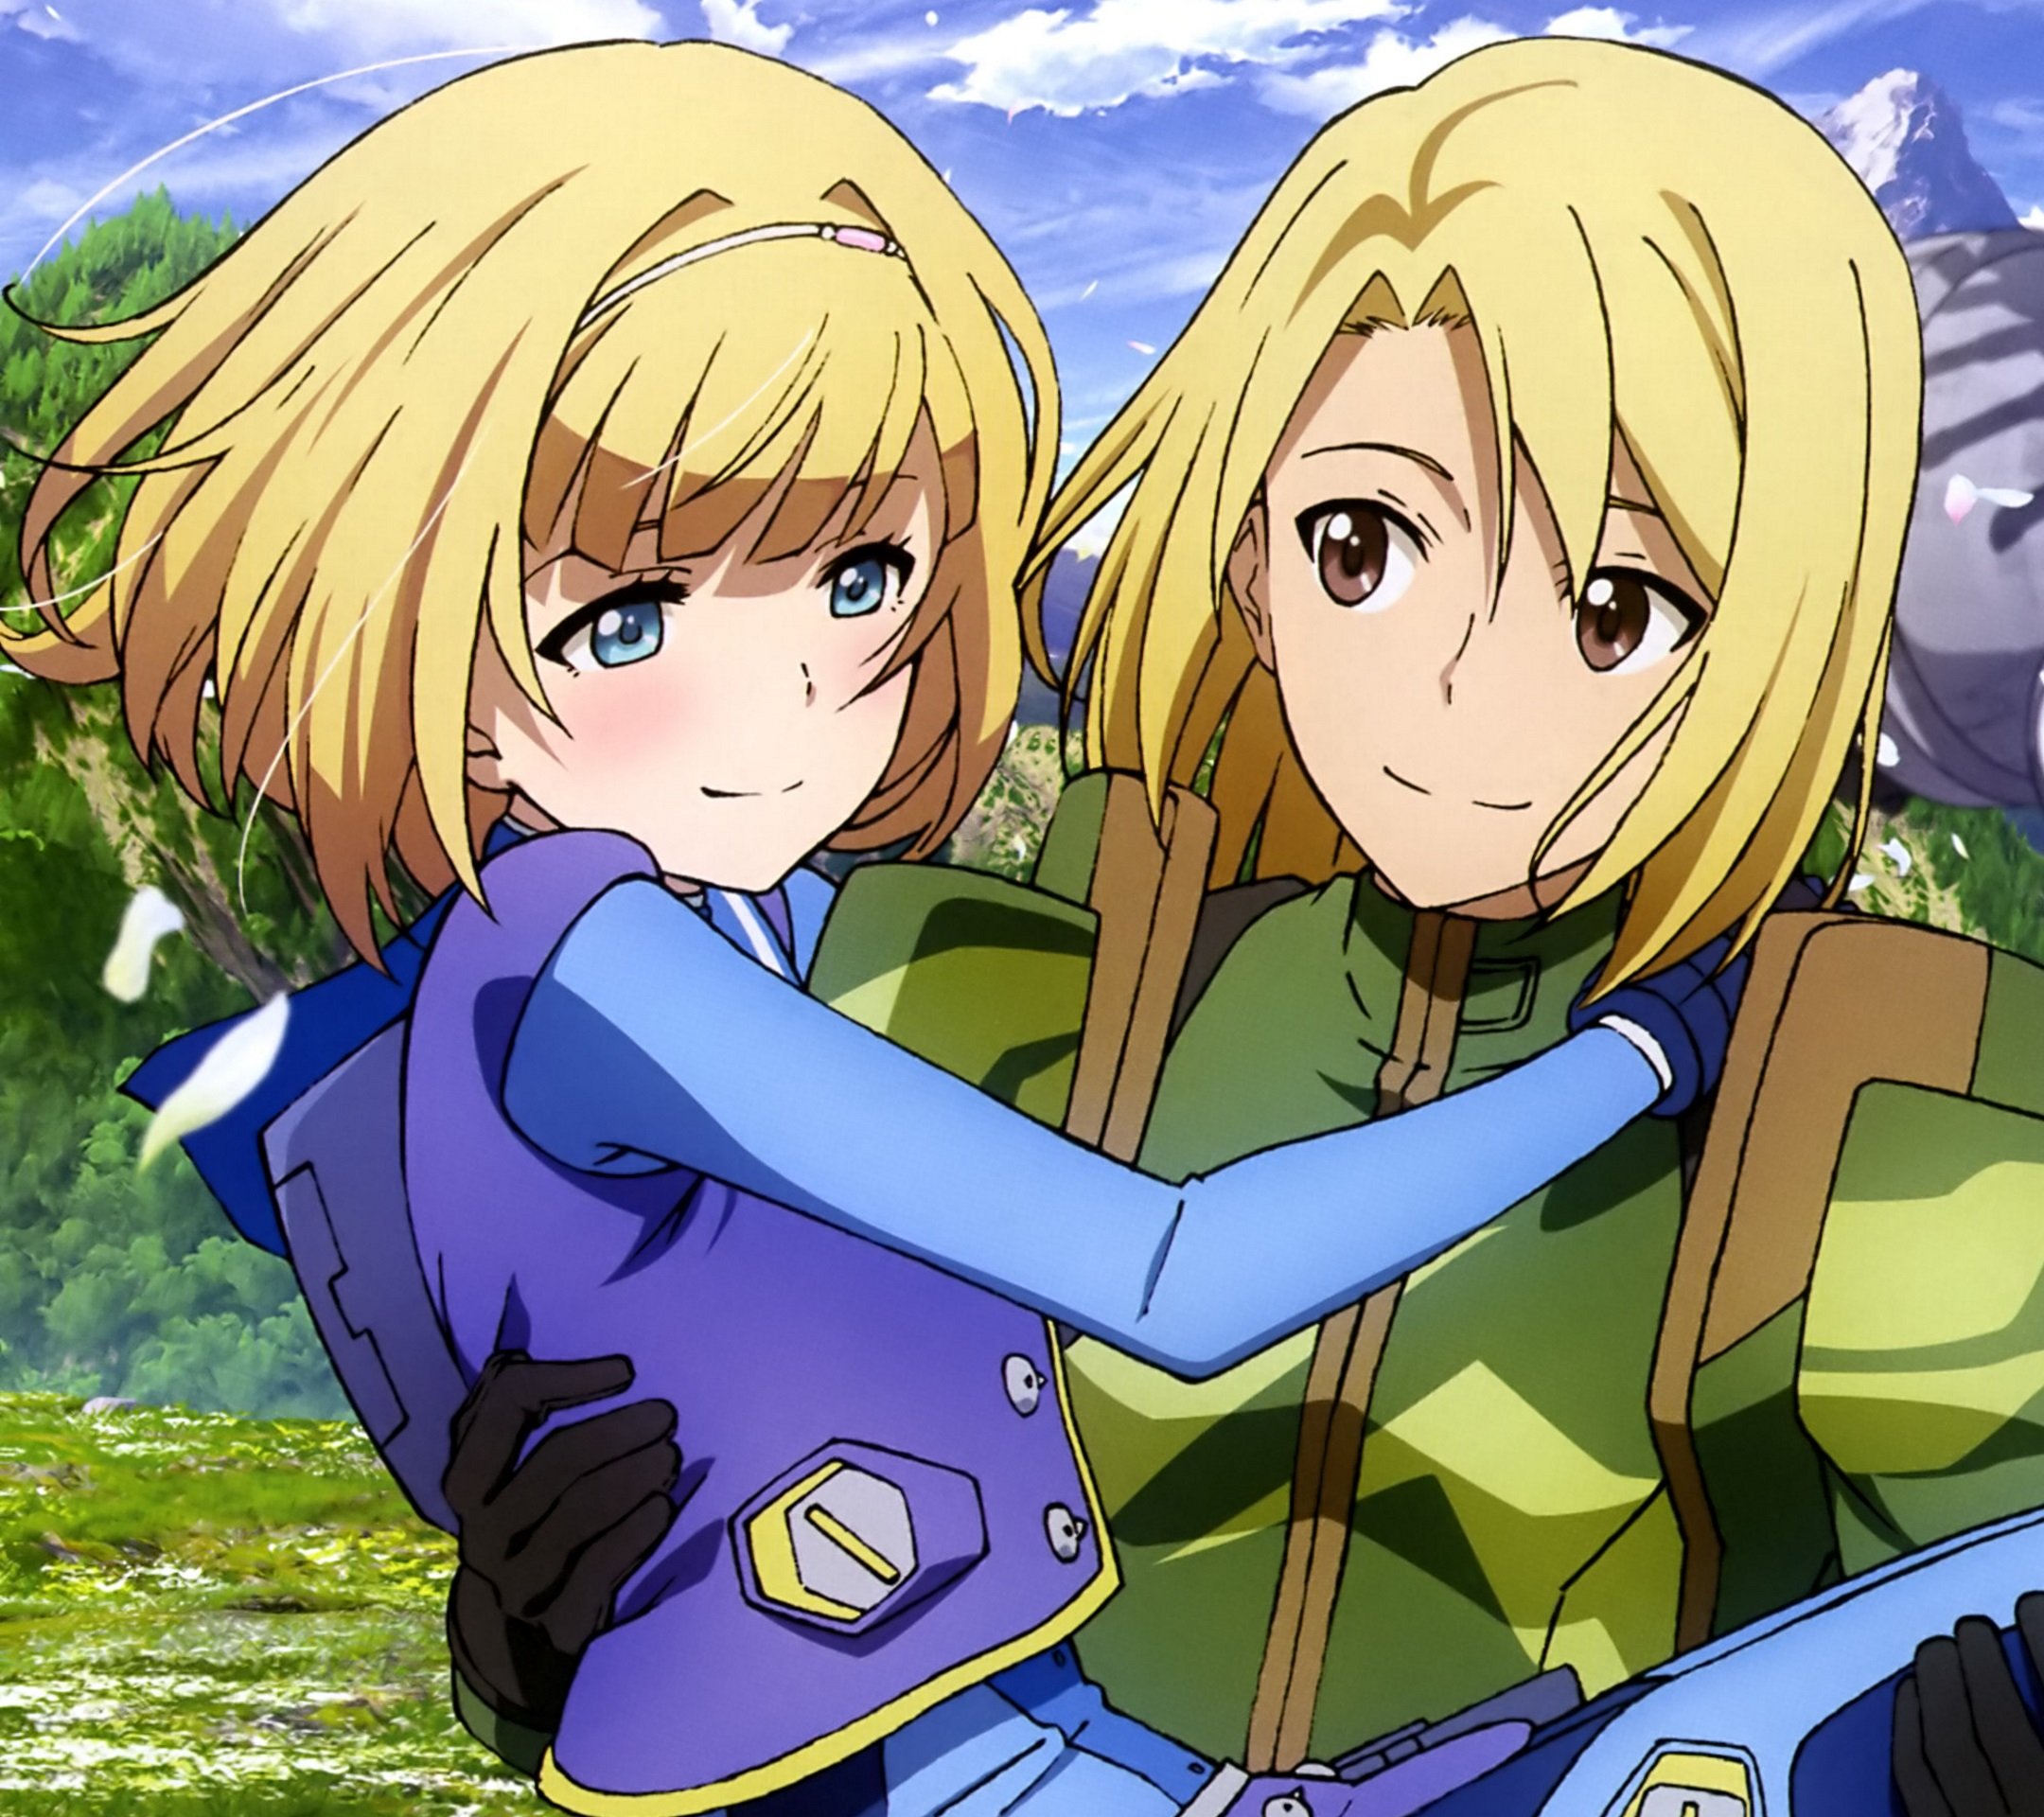 Heavy Object wallpapers for iPhone and android smartphones